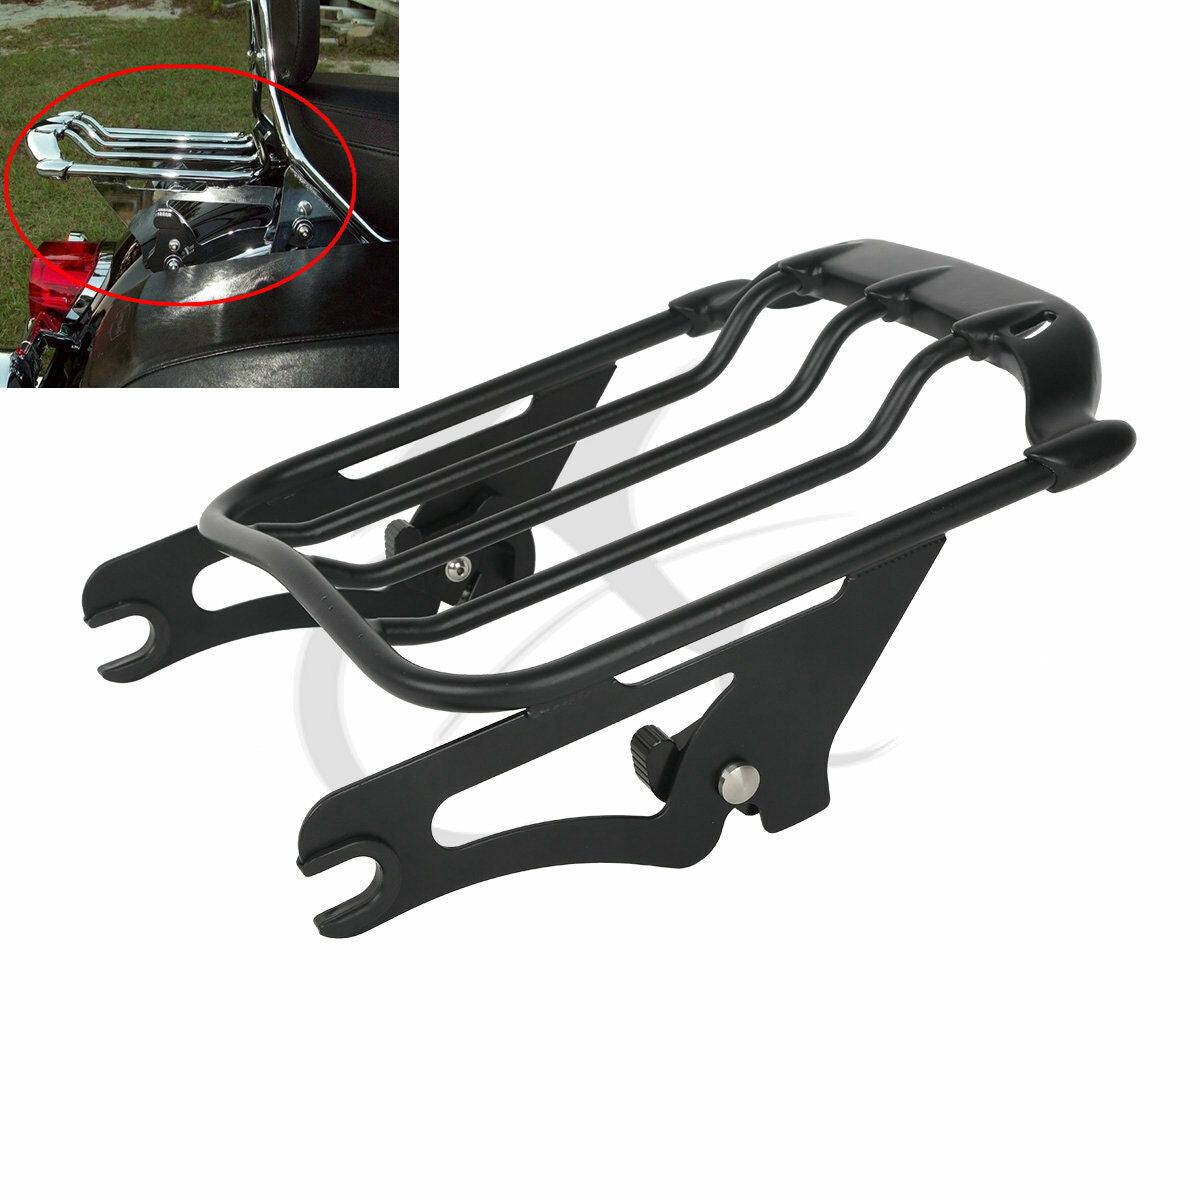 Two Up Luggage Rack Fit For Harley Touring Road Glide King Air Wing 2009-2021 - Moto Life Products